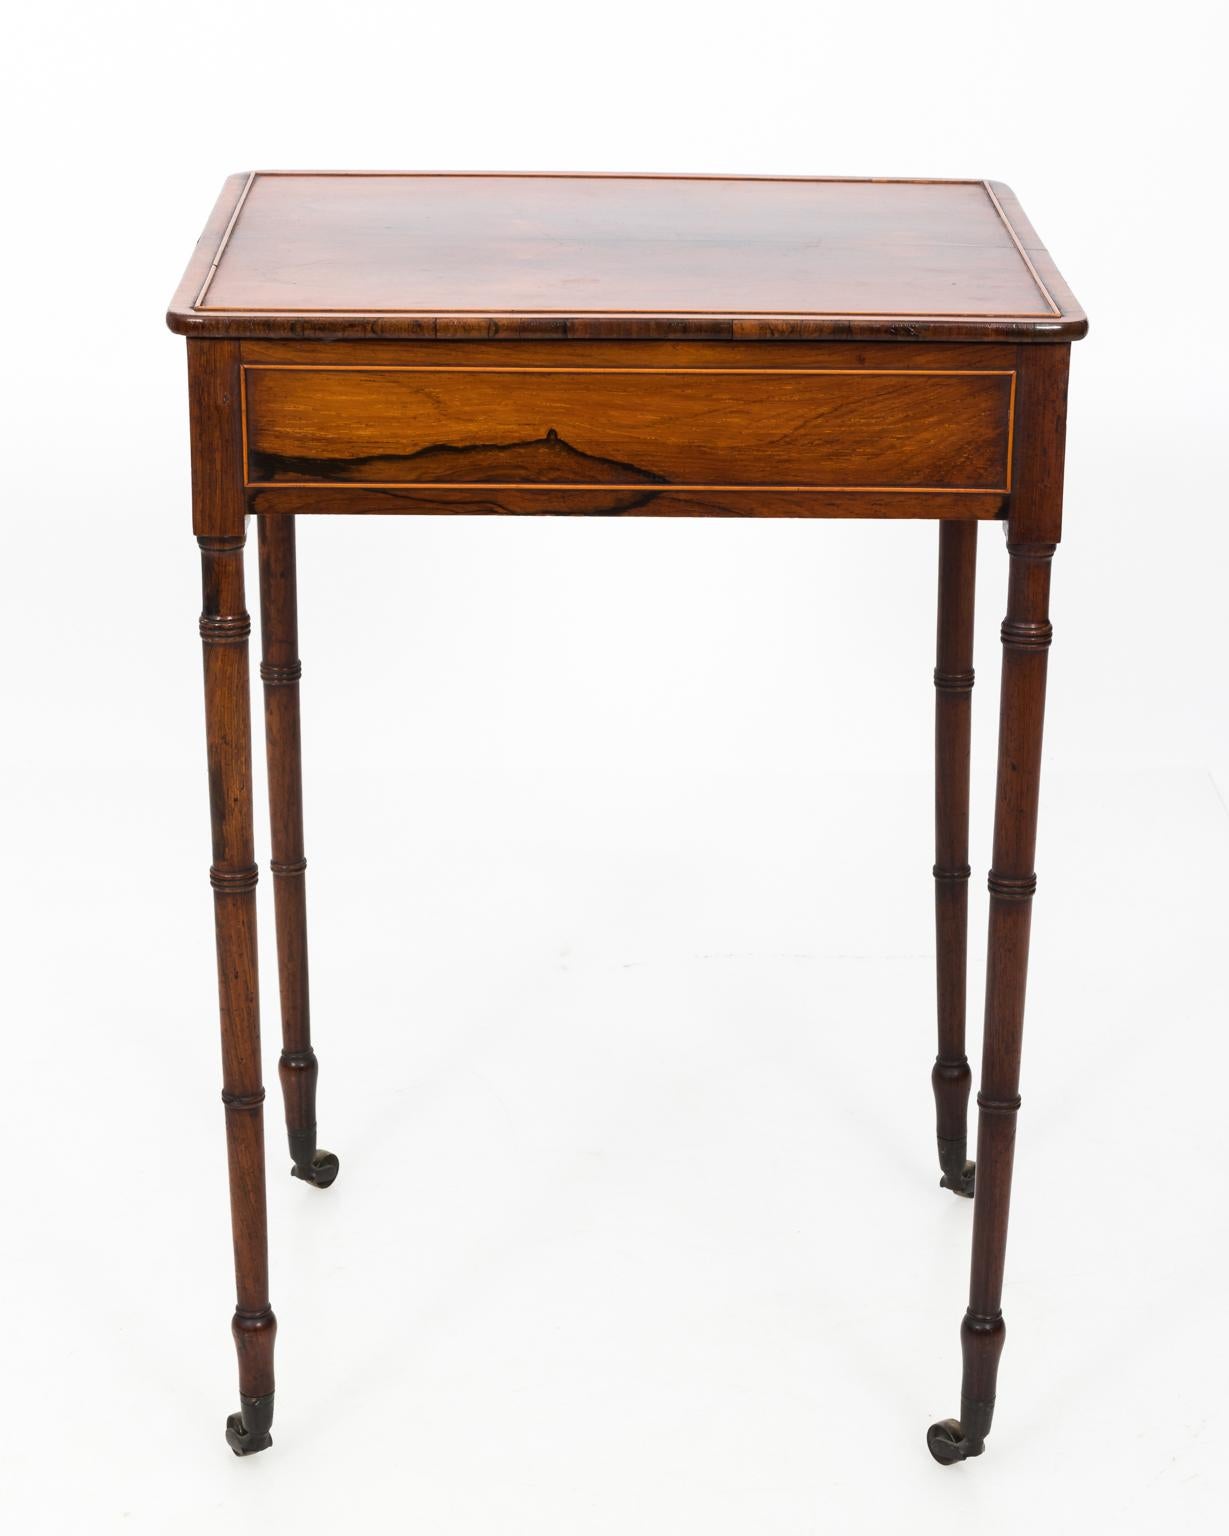 Rosewood English Regency writing table with one hidden drawer on castors, circa 19th century. The table also features raised wood inlay trim and faux-bamboo turned legs.